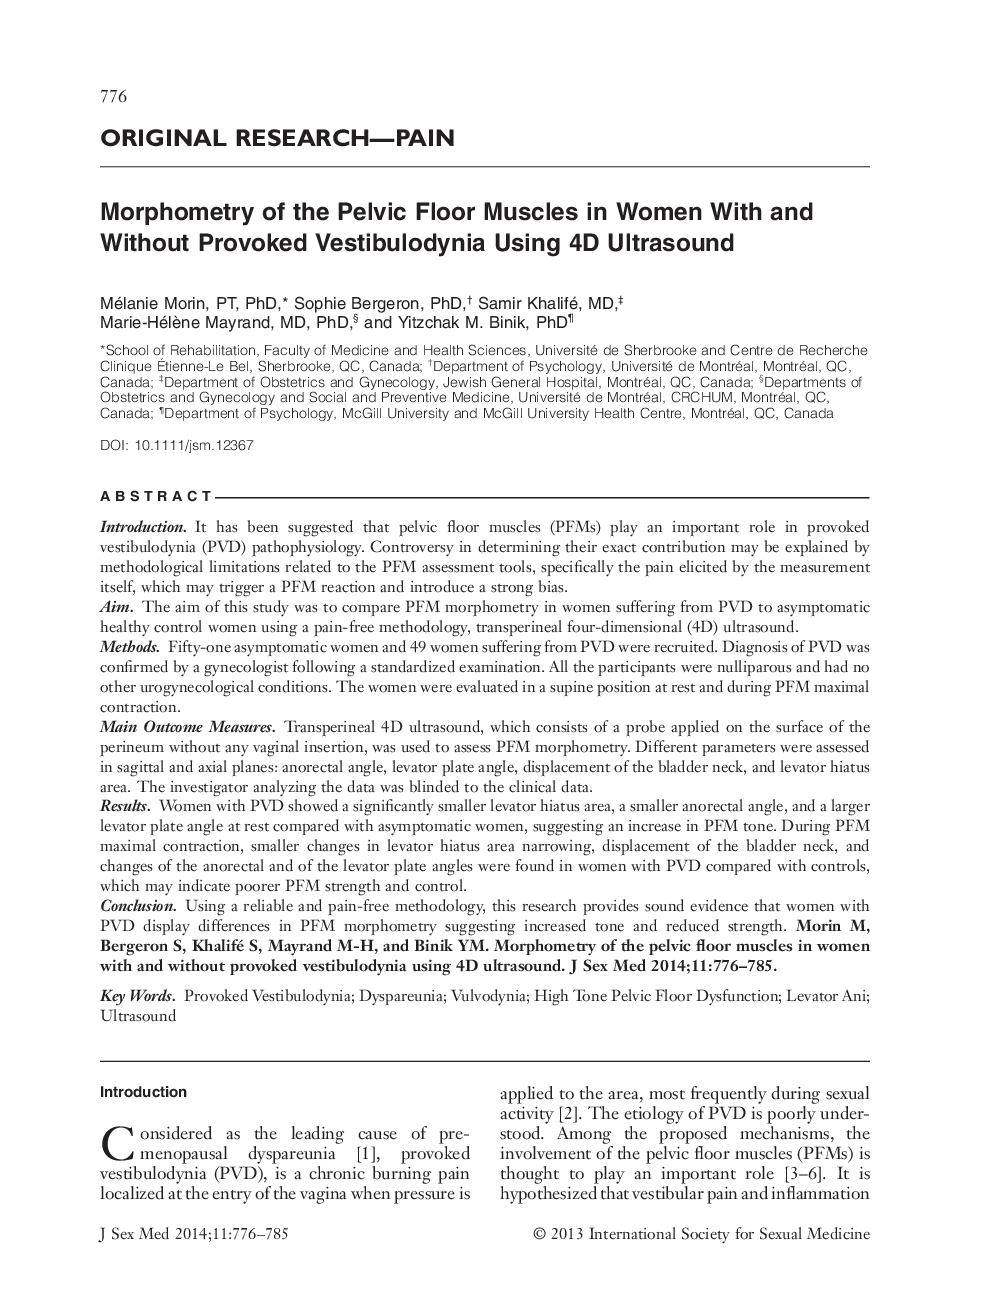 Morphometry of the Pelvic Floor Muscles in Women With and Without Provoked Vestibulodynia Using 4D Ultrasound